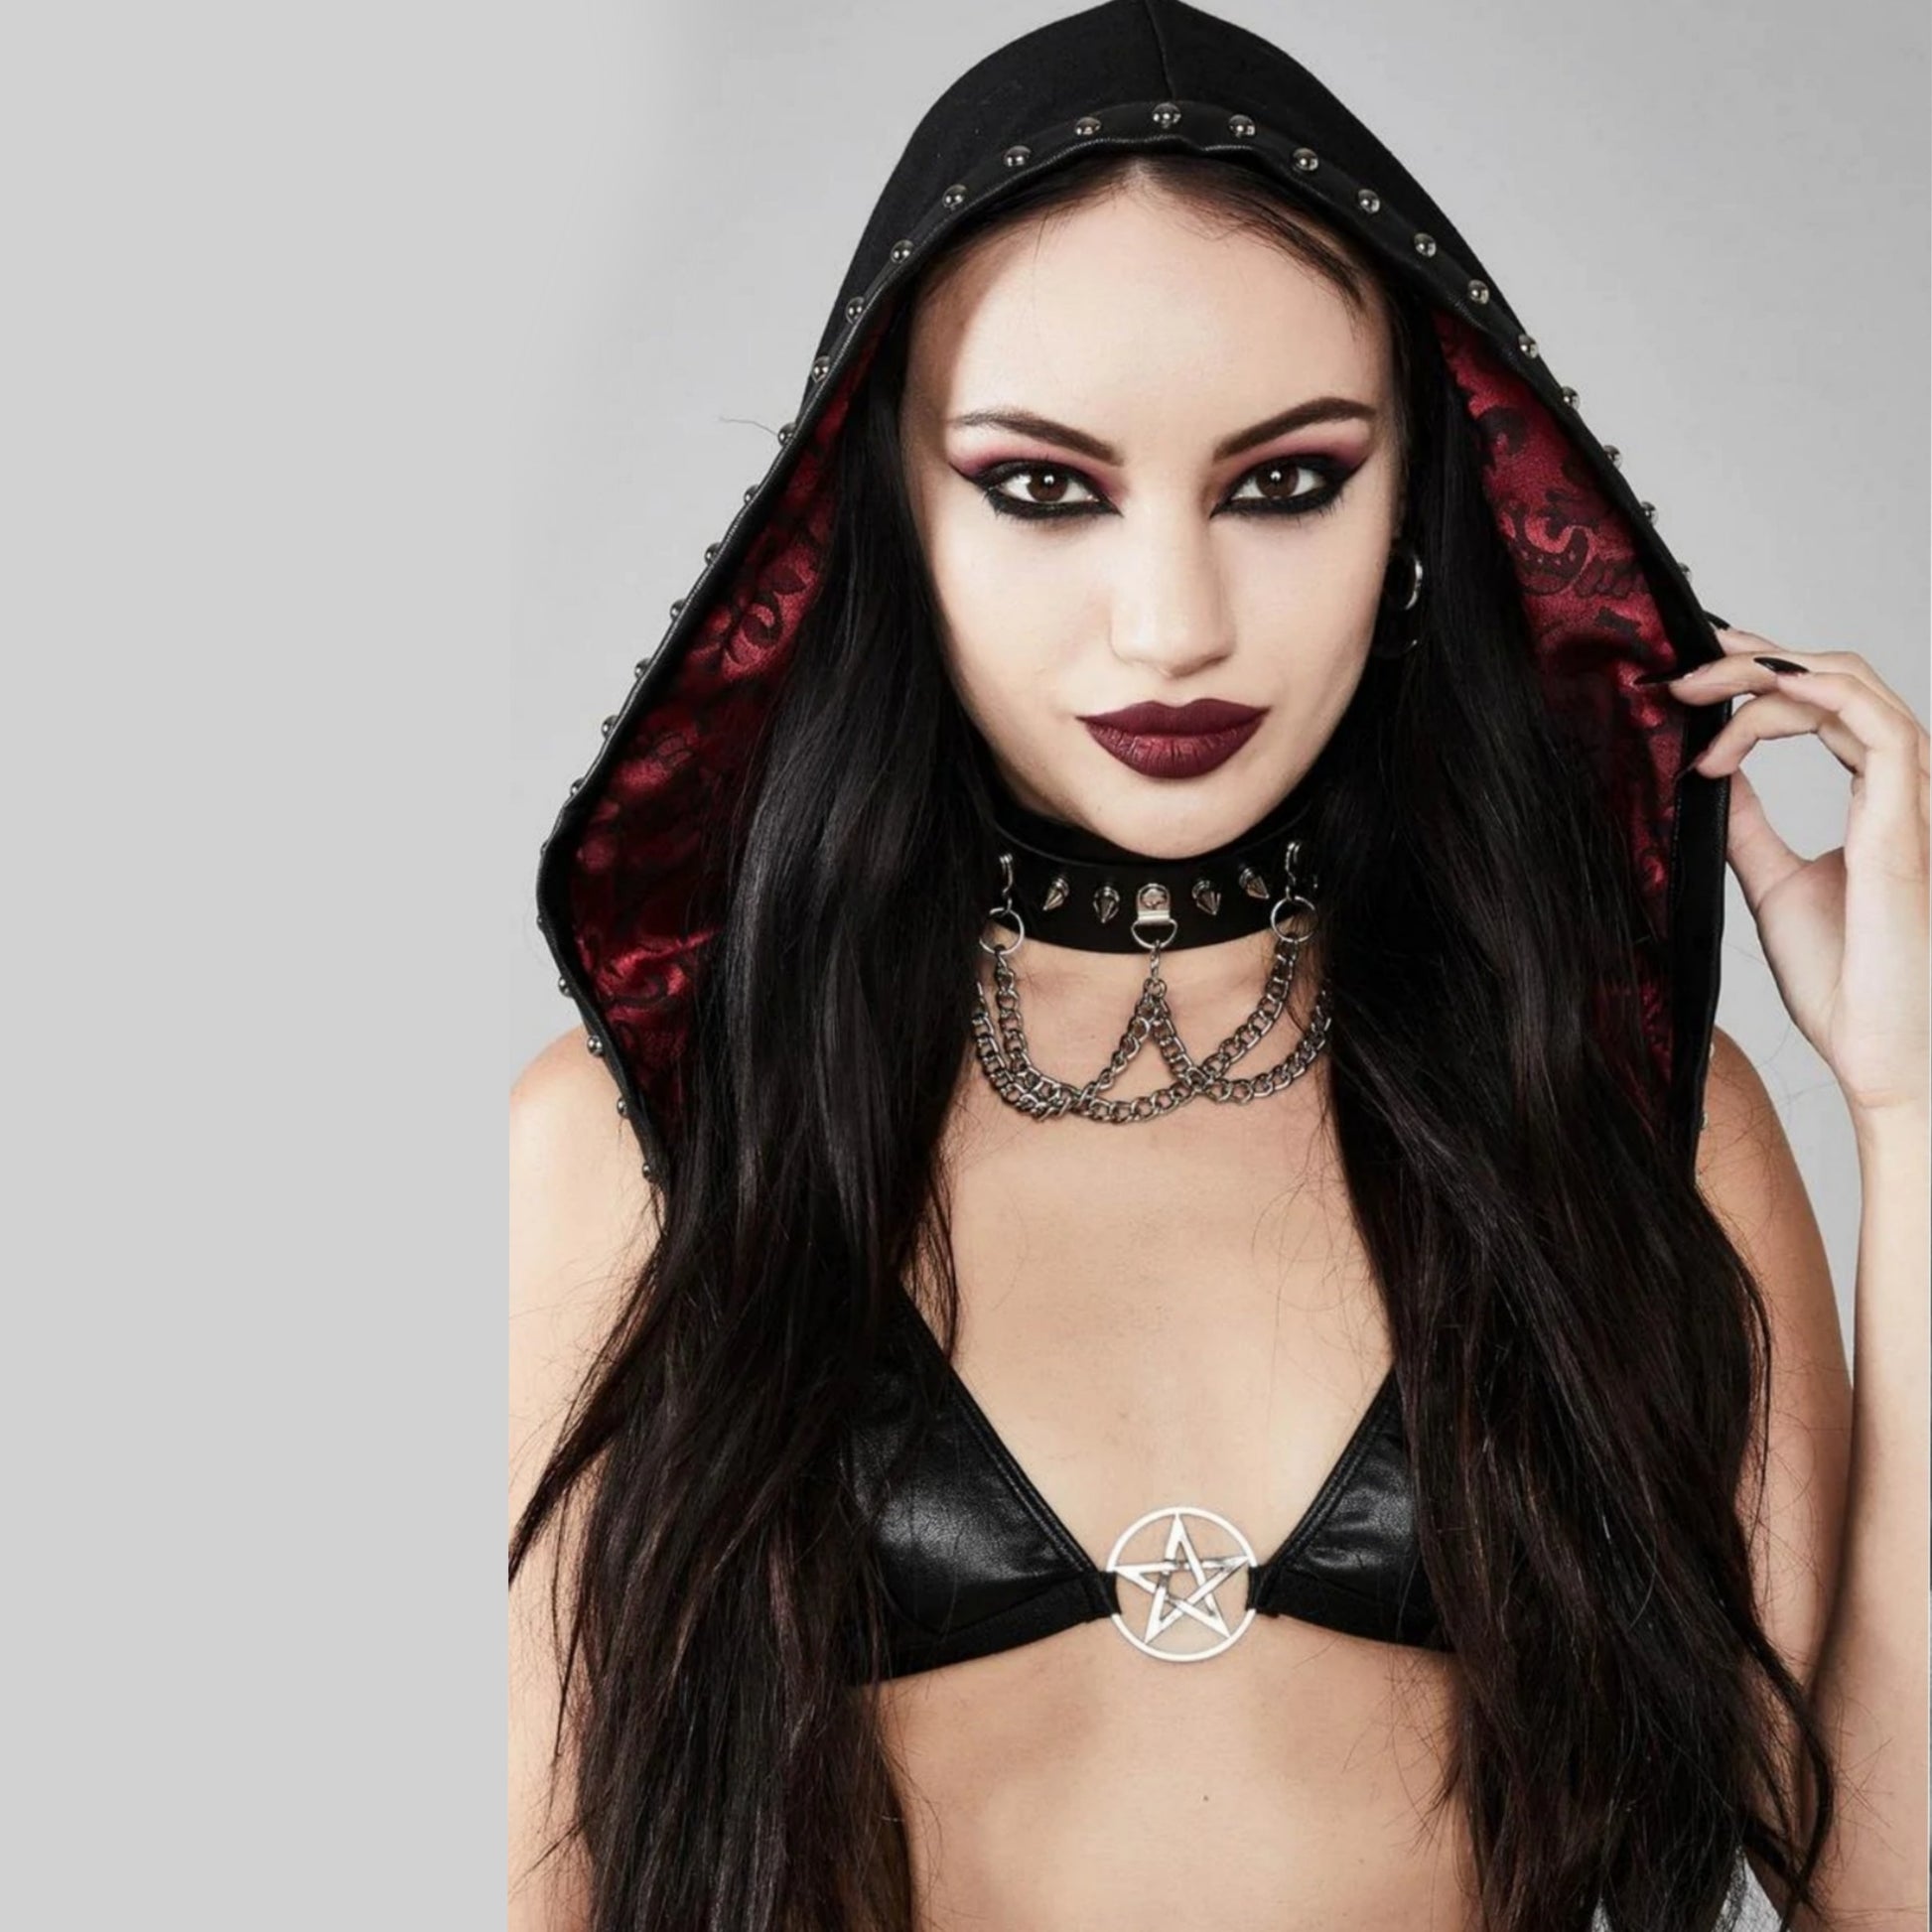 Gothic Wicked Hood | Black Silver O-Rings Chains Burgundy Design Inside - Widow - Hoods